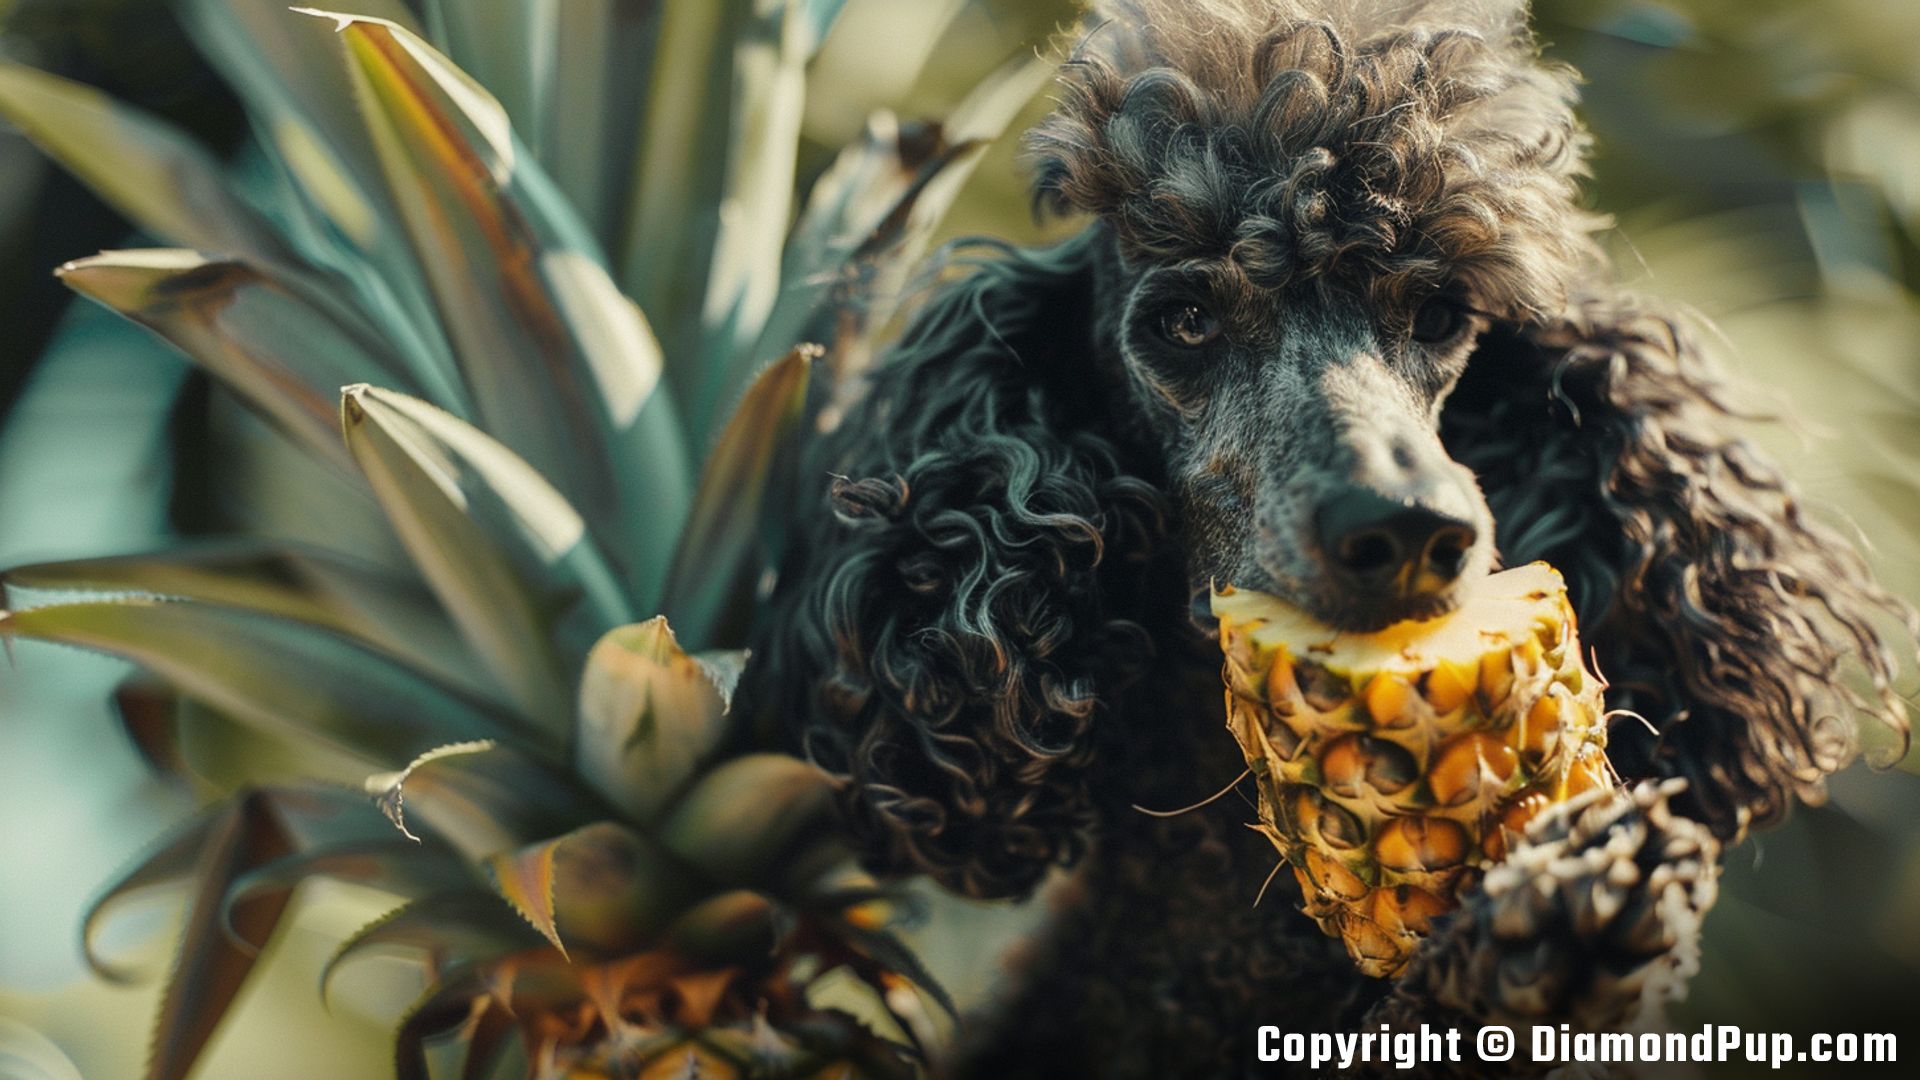 Image of Poodle Eating Pineapple